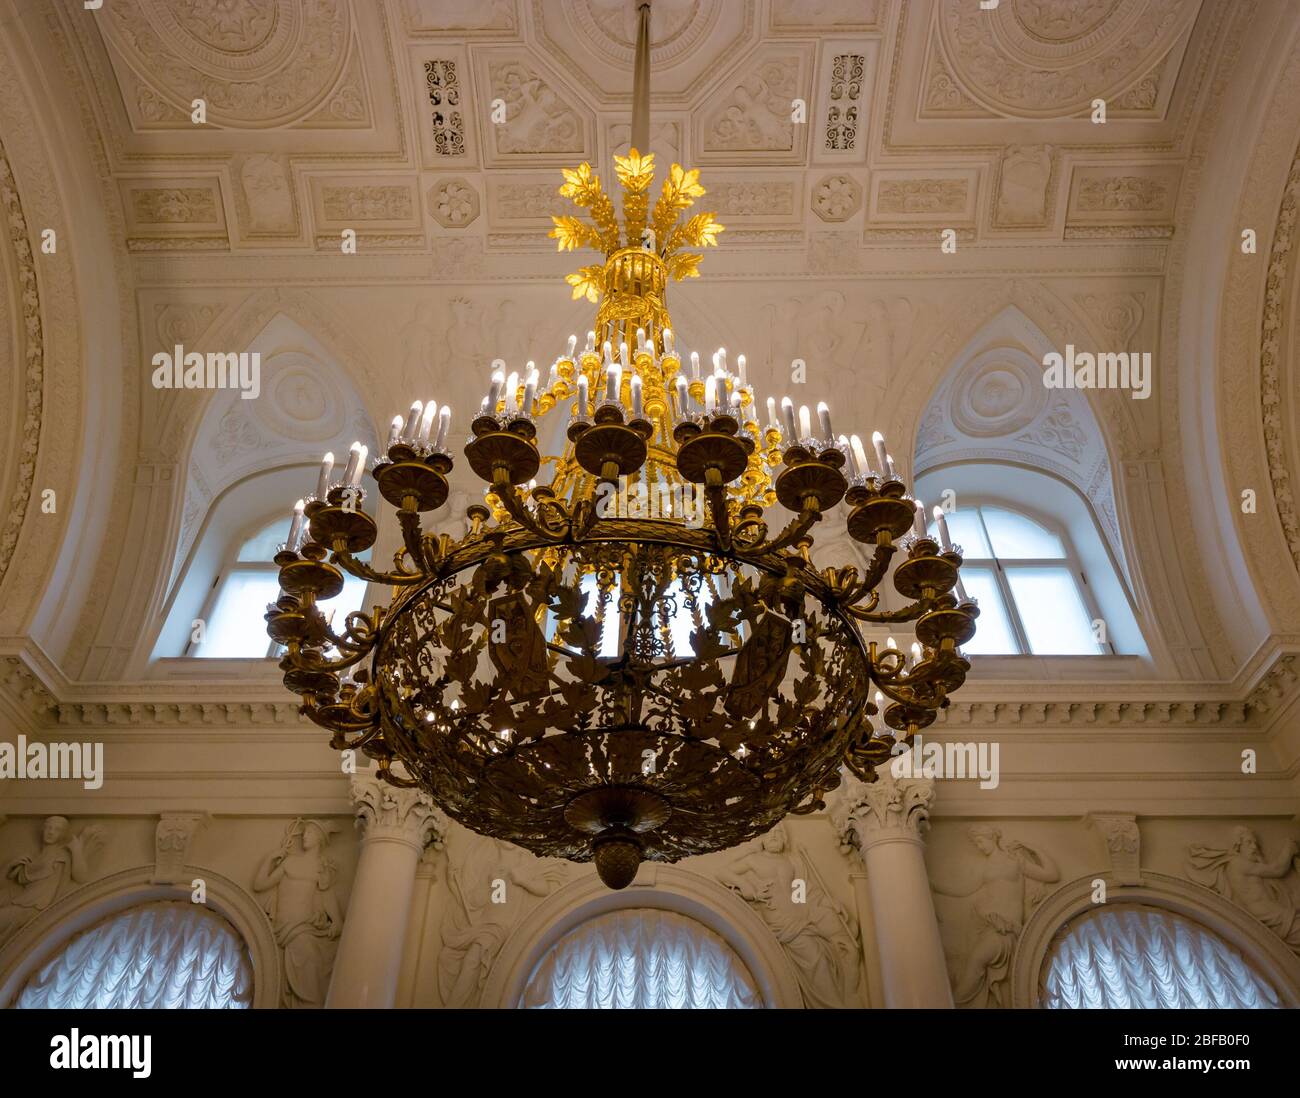 Chandelier in The White Hall by architect Alexander Briullov, Hermitage State Museum, Winter Palace, St Petersburg, Russian Federation Stock Photo